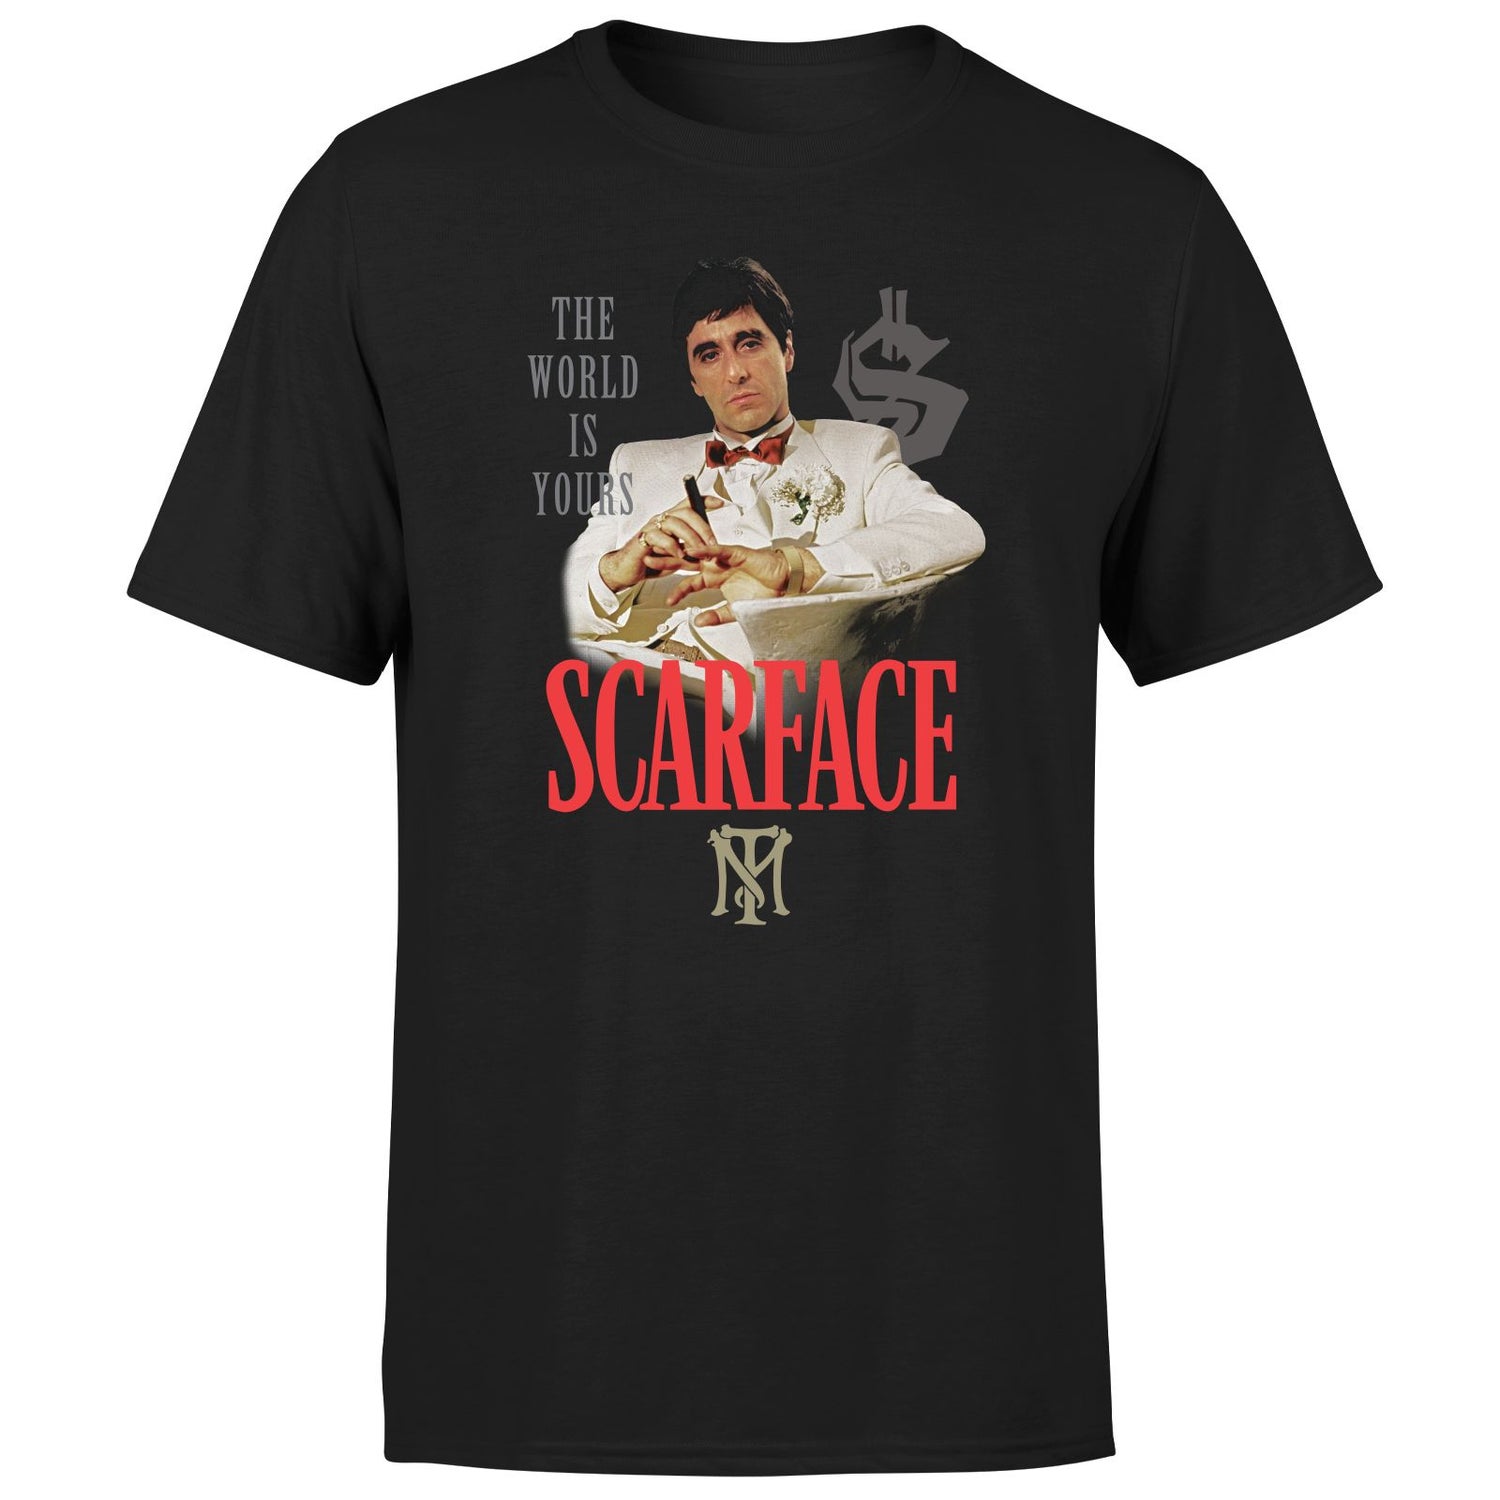 Scarface The World Is Yours Unisex T-Shirt - Black